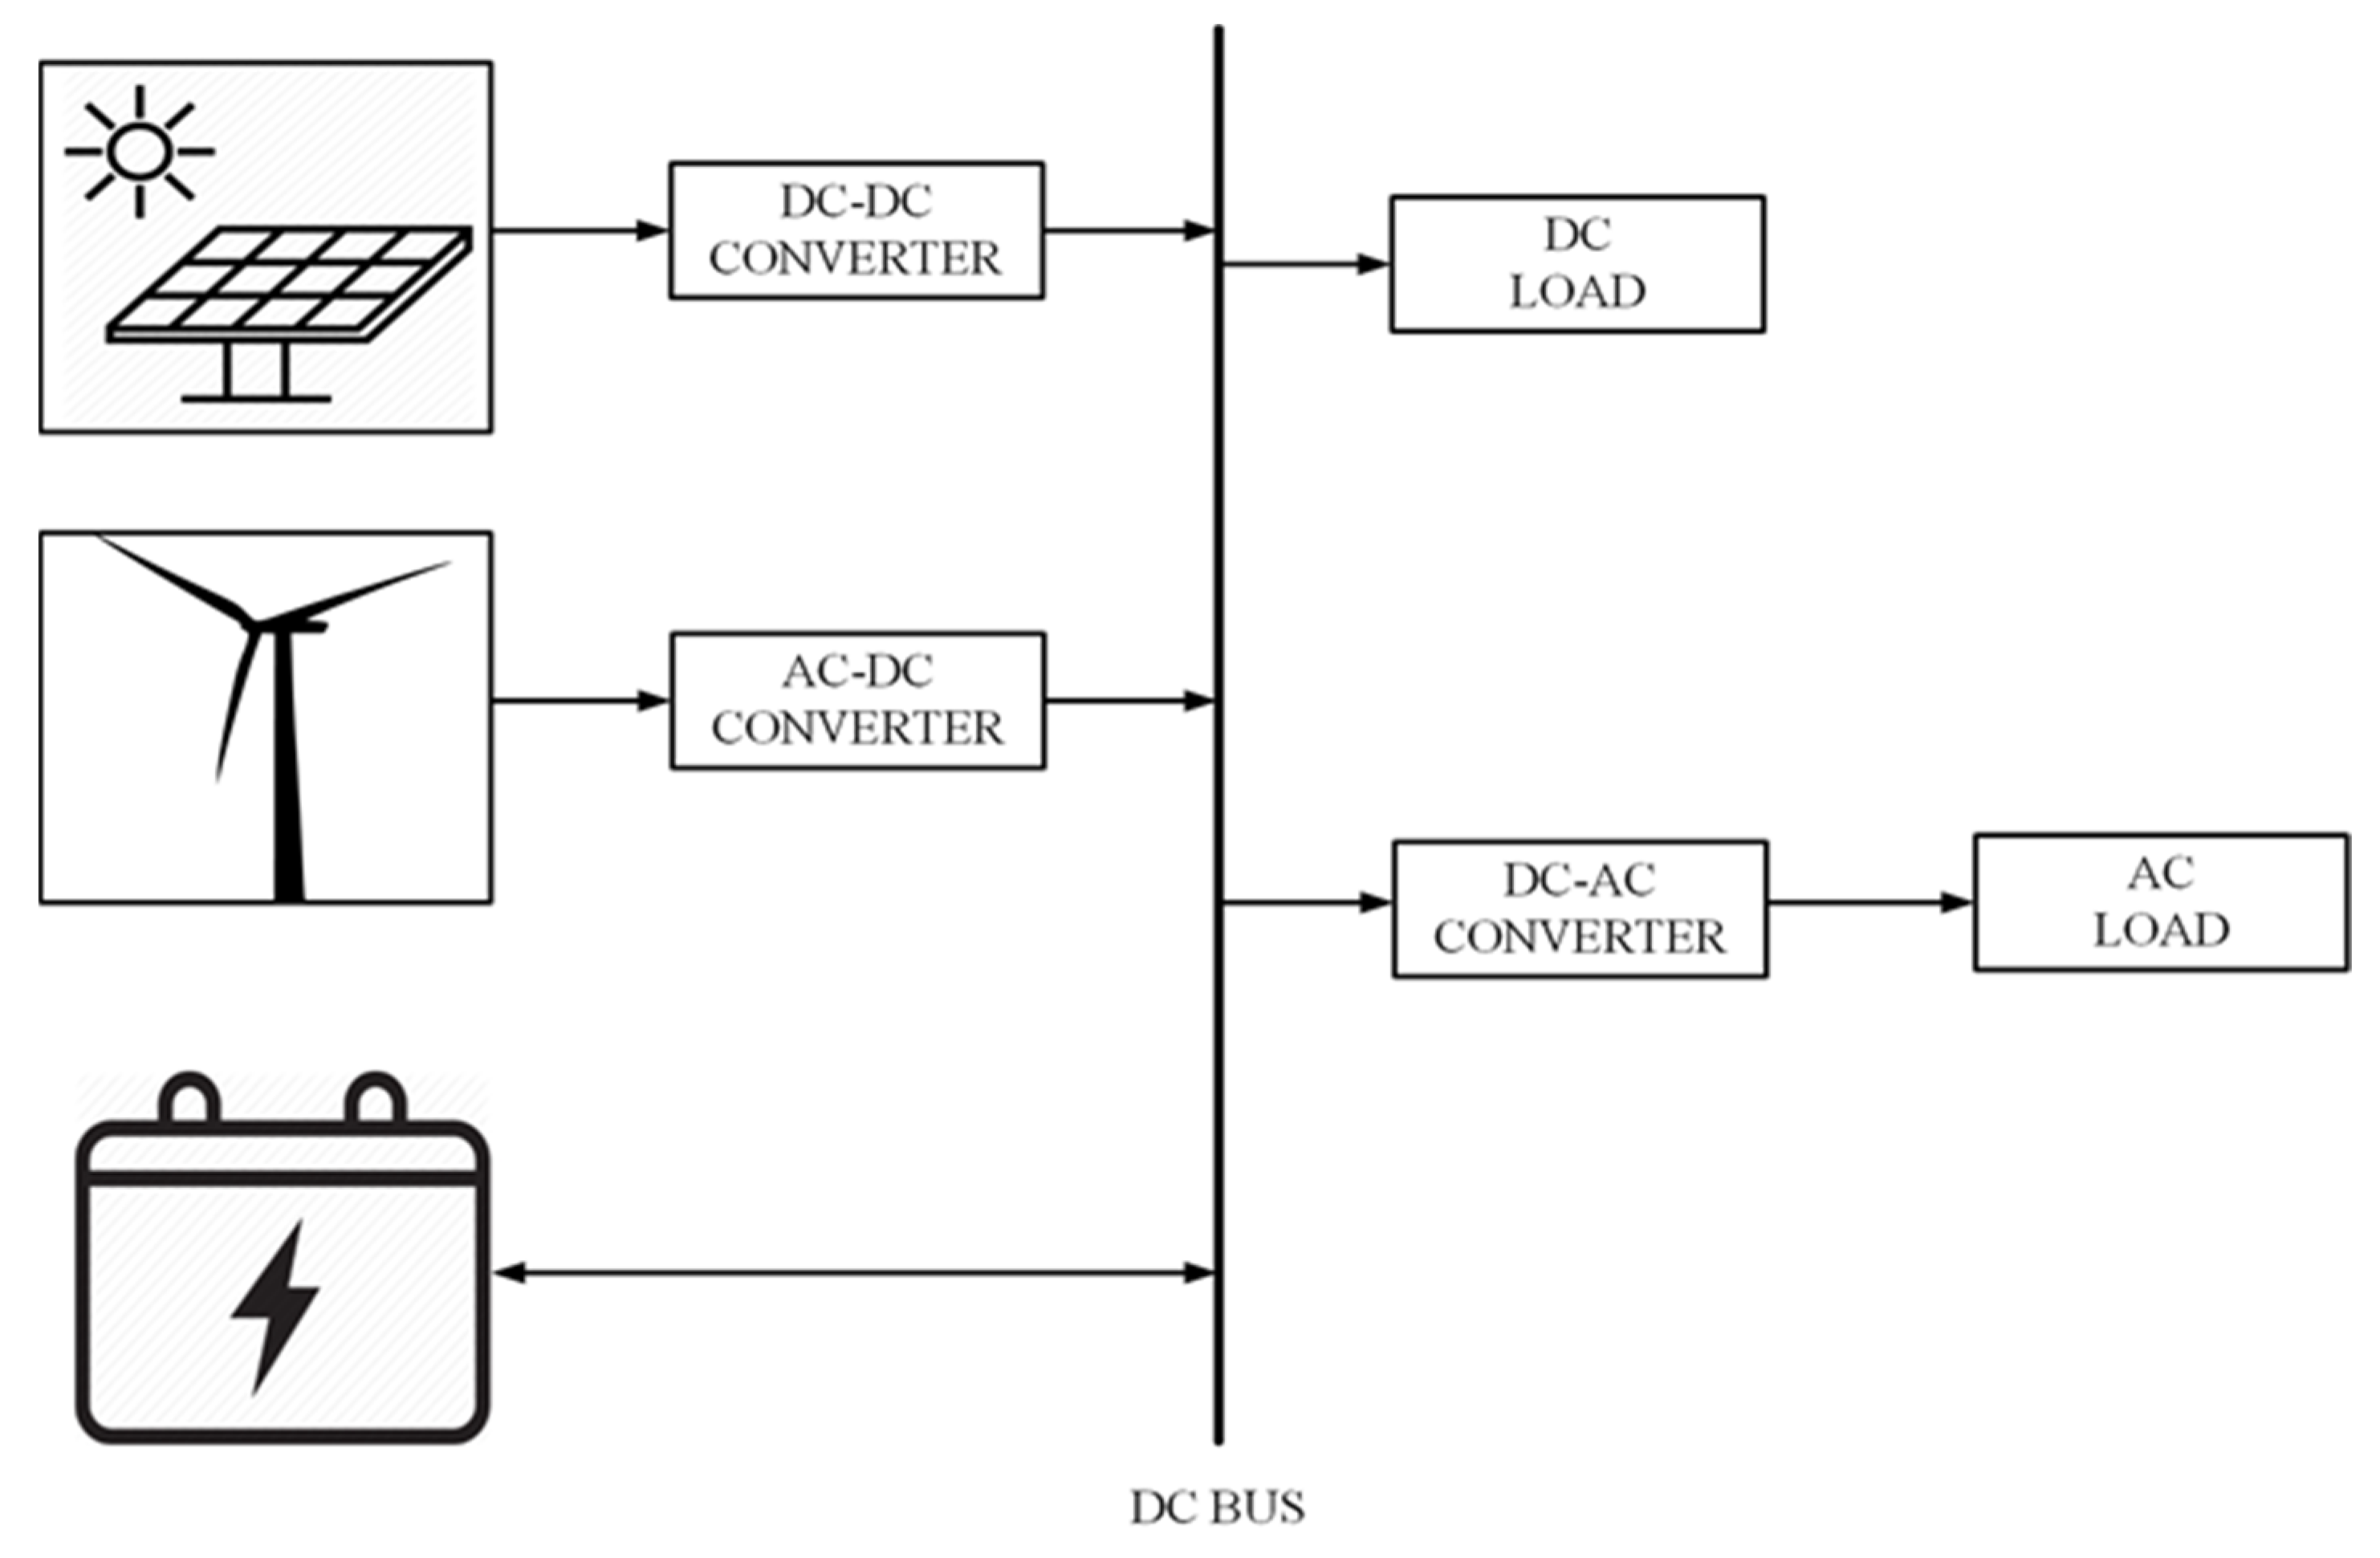 ADC-and-Power-Optimization-Solution-5-EVSYS/driver_isr.c at master ·  lkvenild/ADC-and-Power-Optimization-Solution-5-EVSYS · GitHub